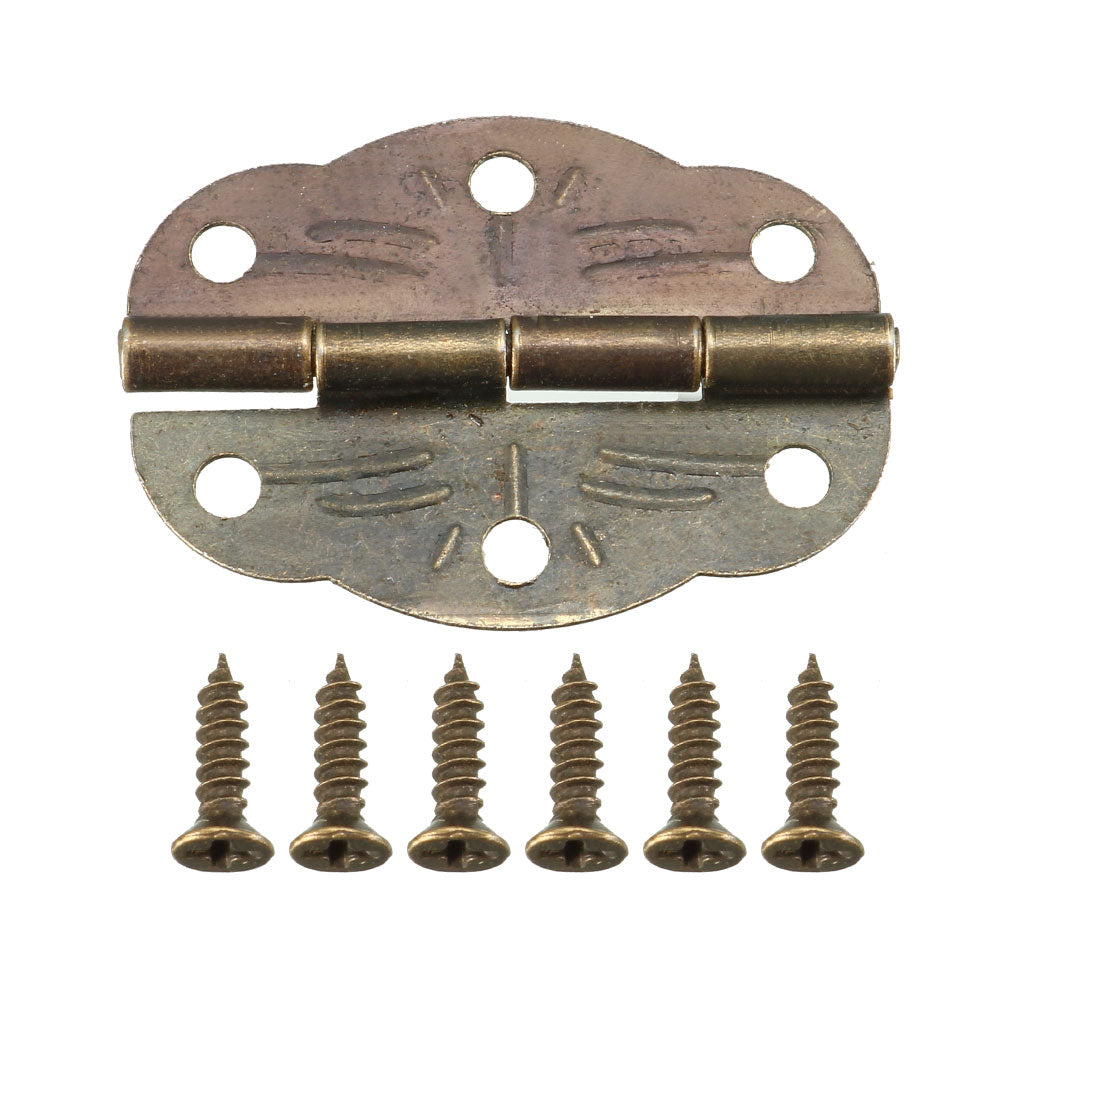 uxcell Uxcell 1.18" Antique Bronze Hinges Retro Mini Hinge Replacement with Screws 20pcs